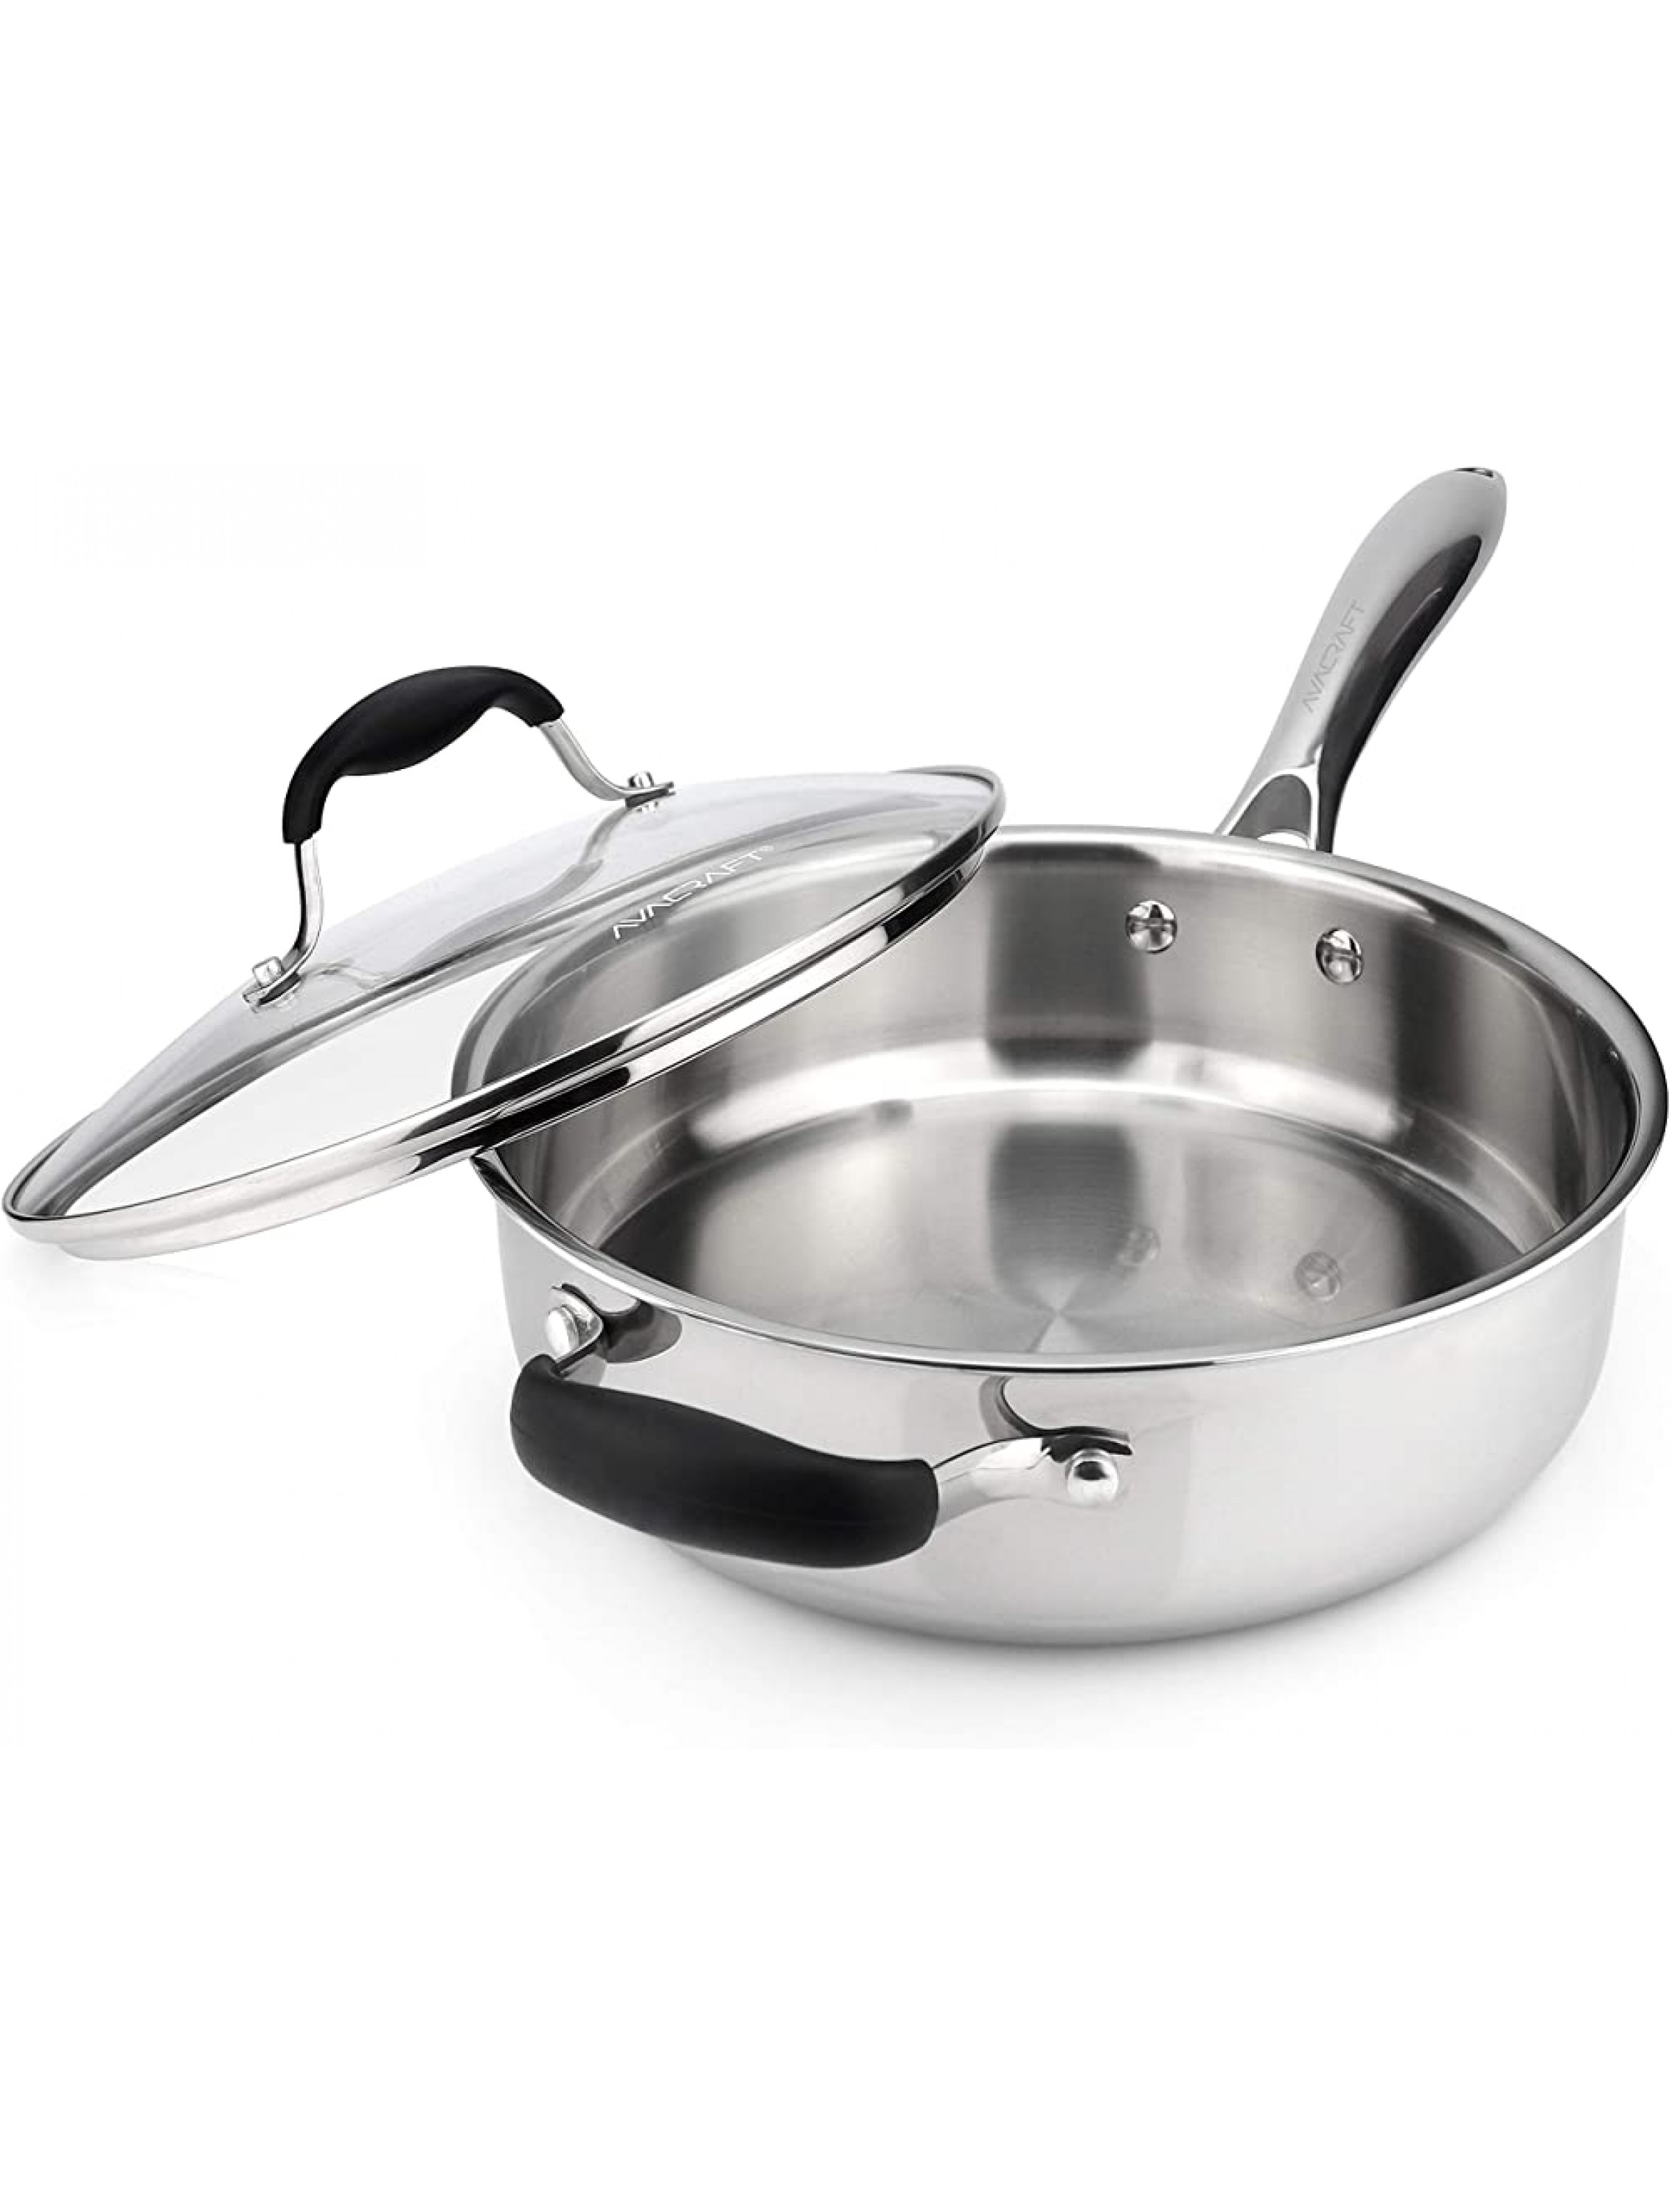 AVACRAFT 18 10 Tri-Ply Stainless Steel Saute Pan with Lid Stay Cool Handle Helper Handle Induction Pan Versatile Stainless Steel Skillet Sauté Pans in our Pots and Pans cookware 3.5 Quarts - B7UMYHP92